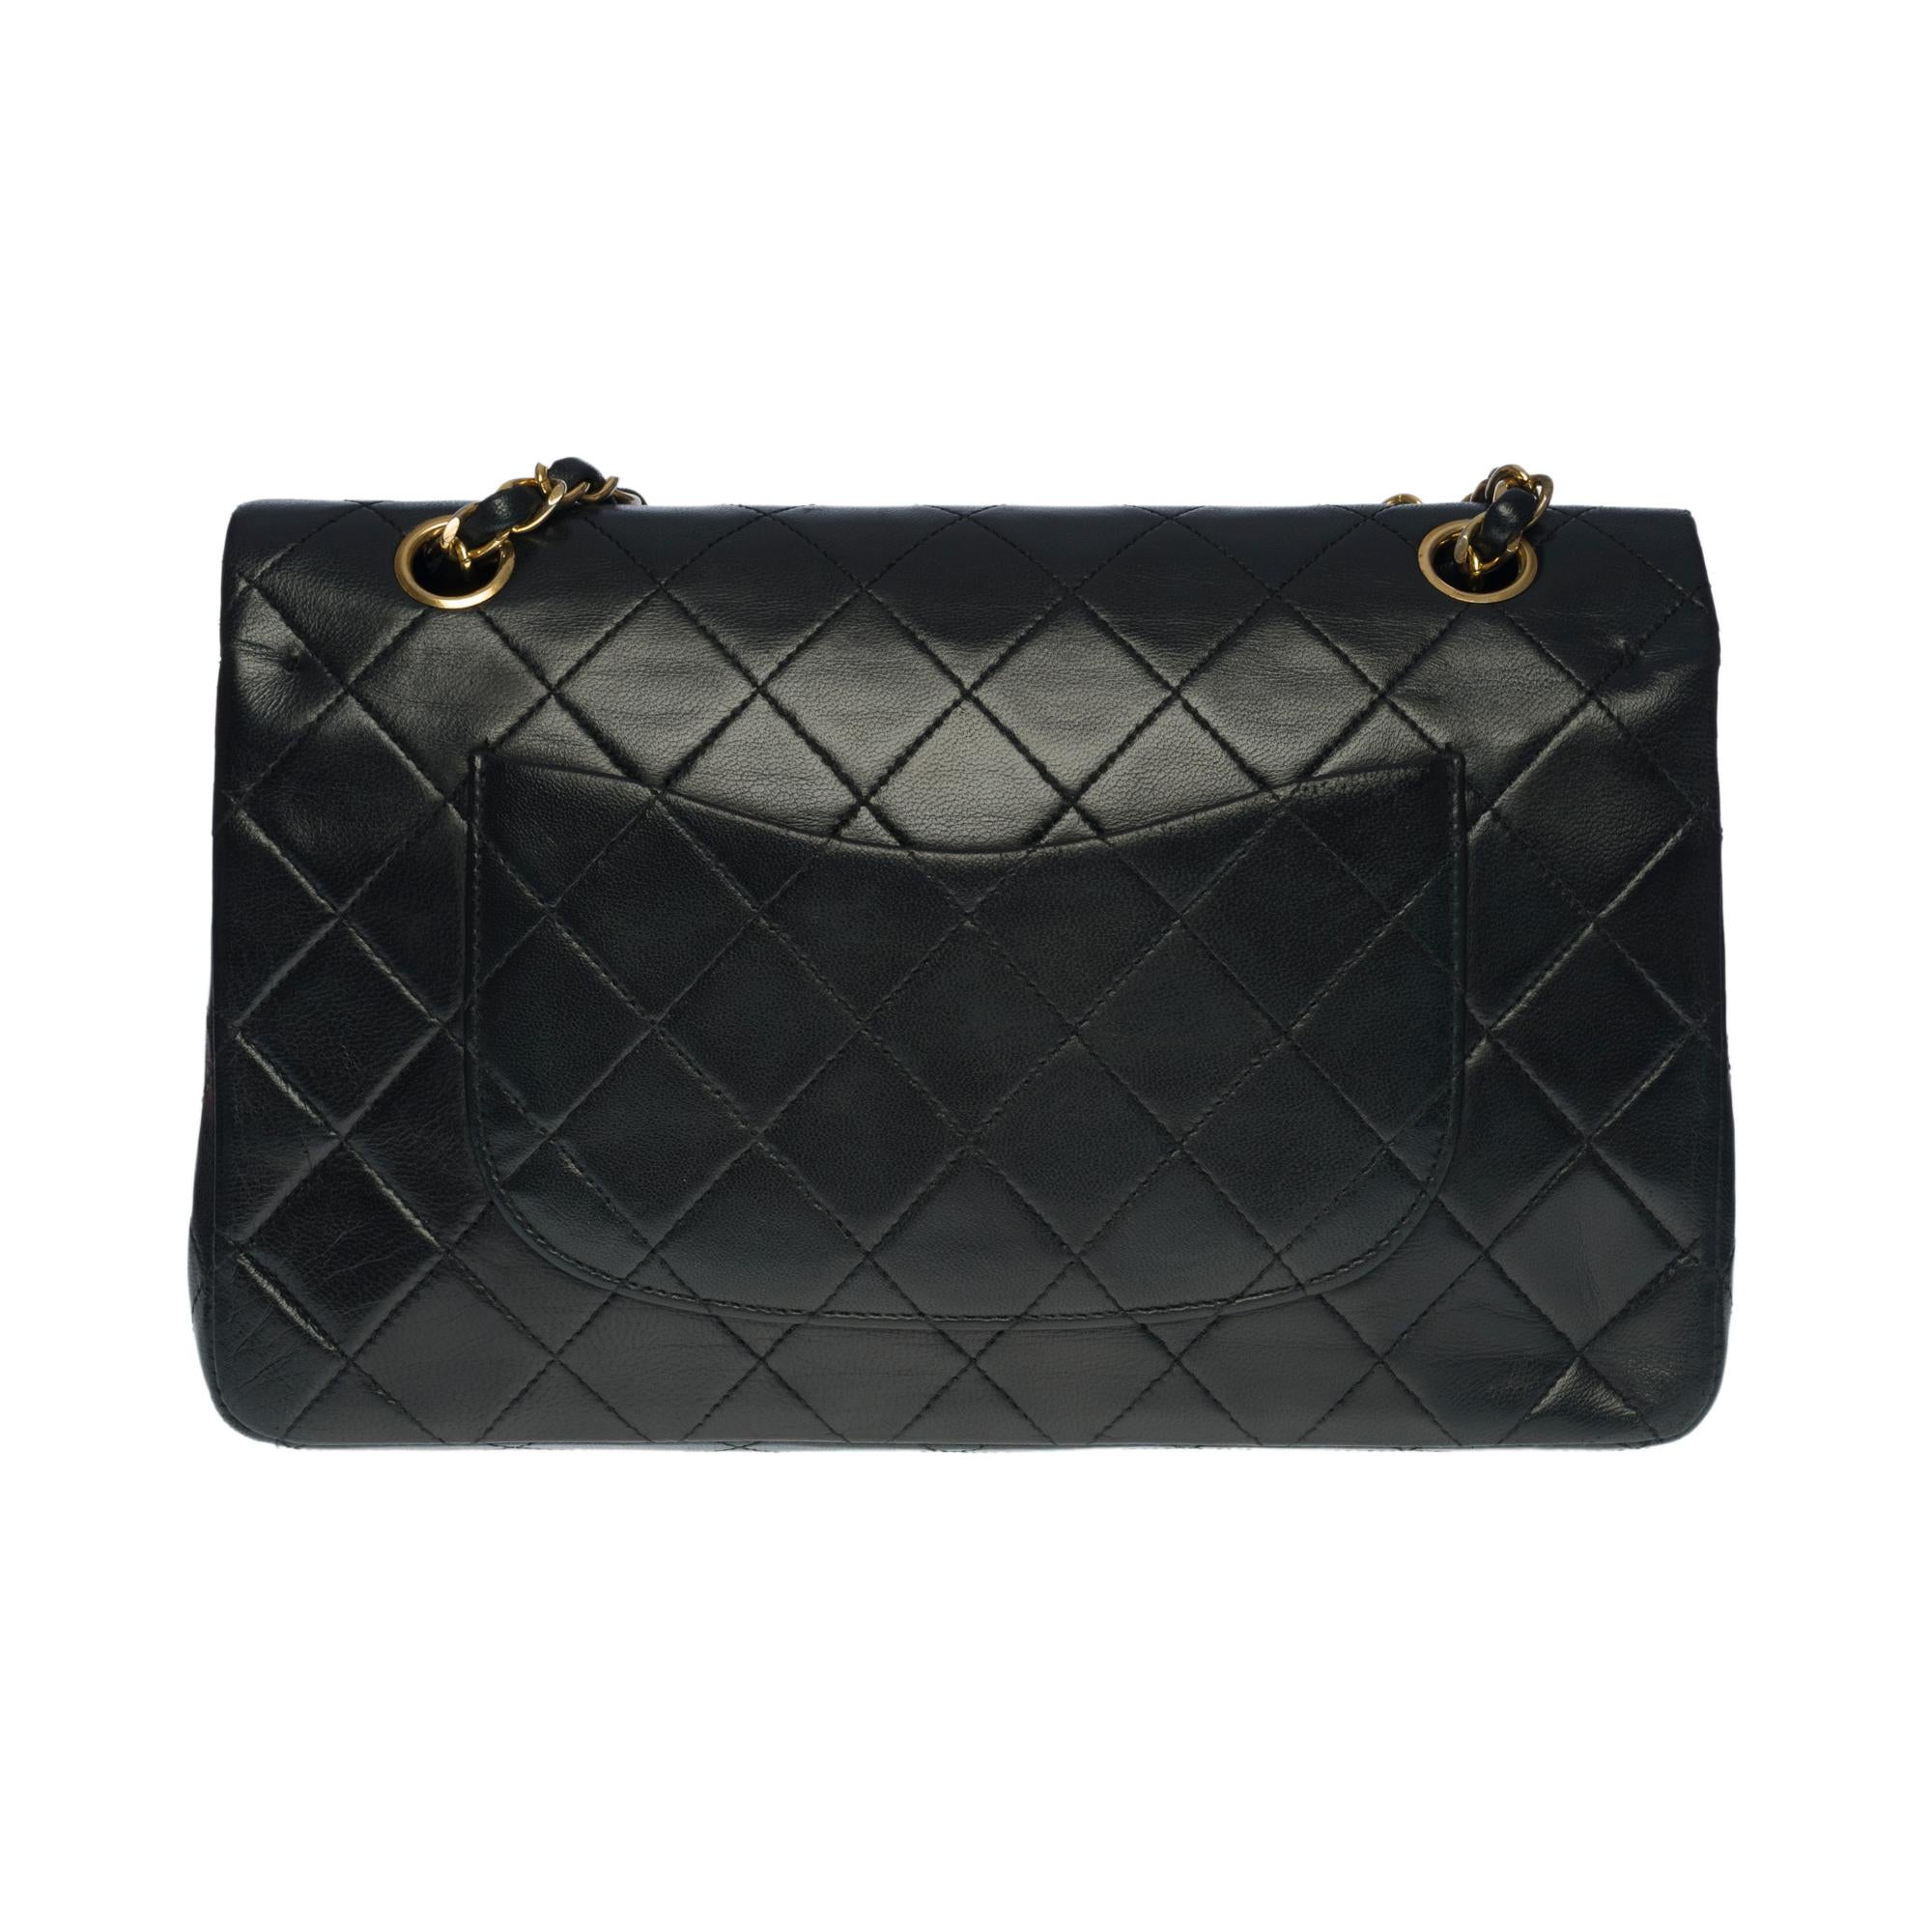 The coveted Chanel Timeless medium 25 cm bag with double flap in black quilted leather, gold metal hardware, gold metal chain interlaced with black leather to be worn on the shoulder and across the body
Pocket on the back of the bag
Flap closure,